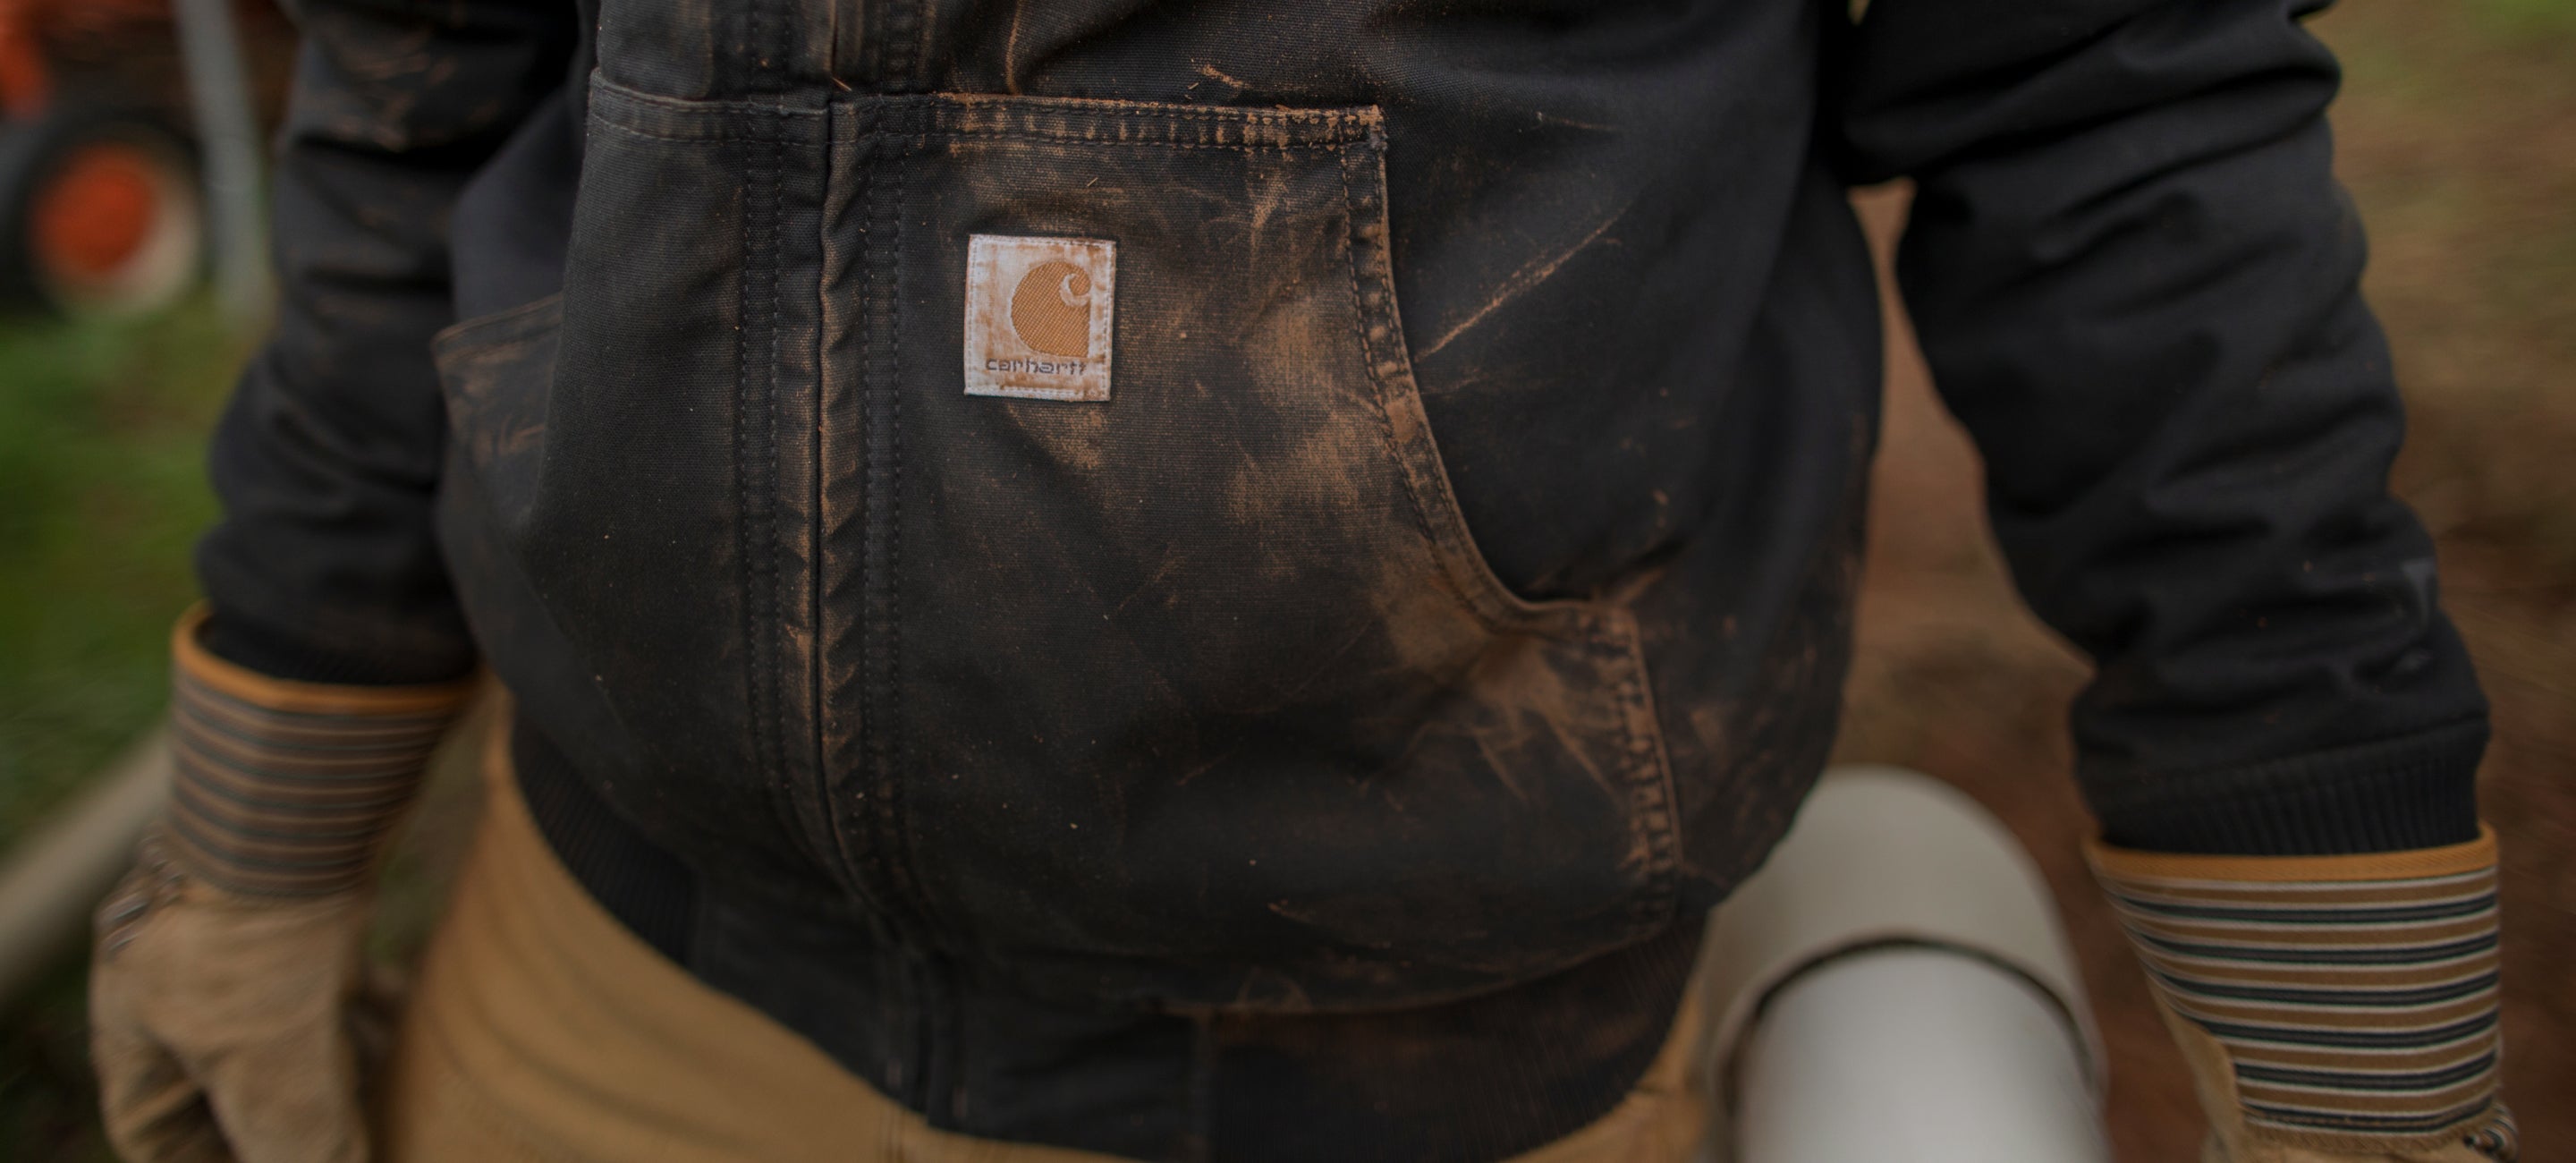 How to Trade Your Used Carhartt for Credit